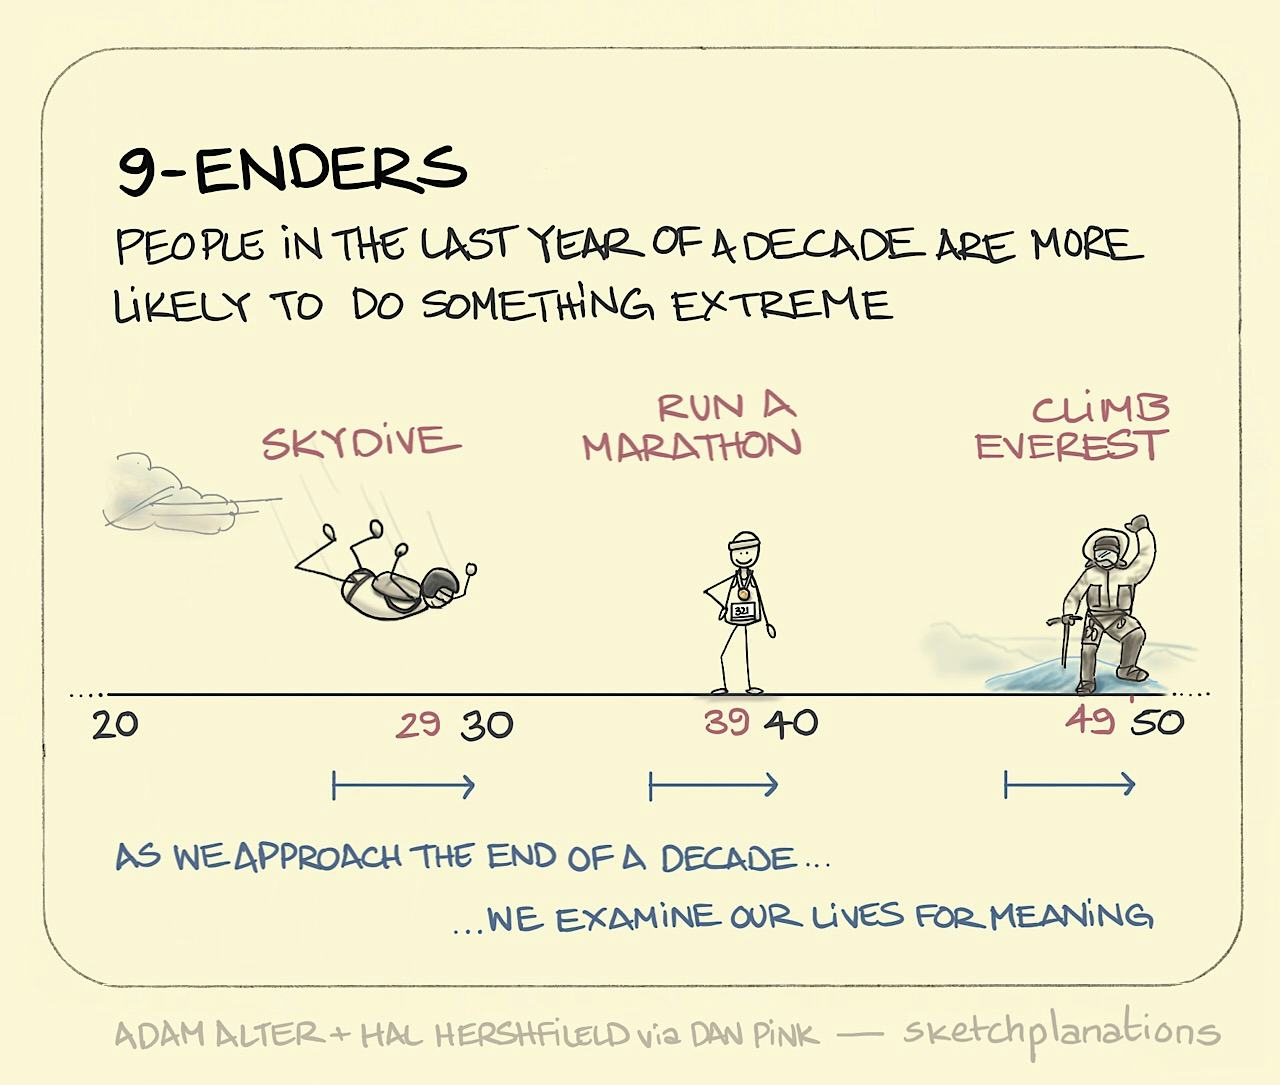 9-enders: people approaching their 30s, 40s and 50s, examining their lives for meaning and setting off skydiving, running marathons and climbing Everest